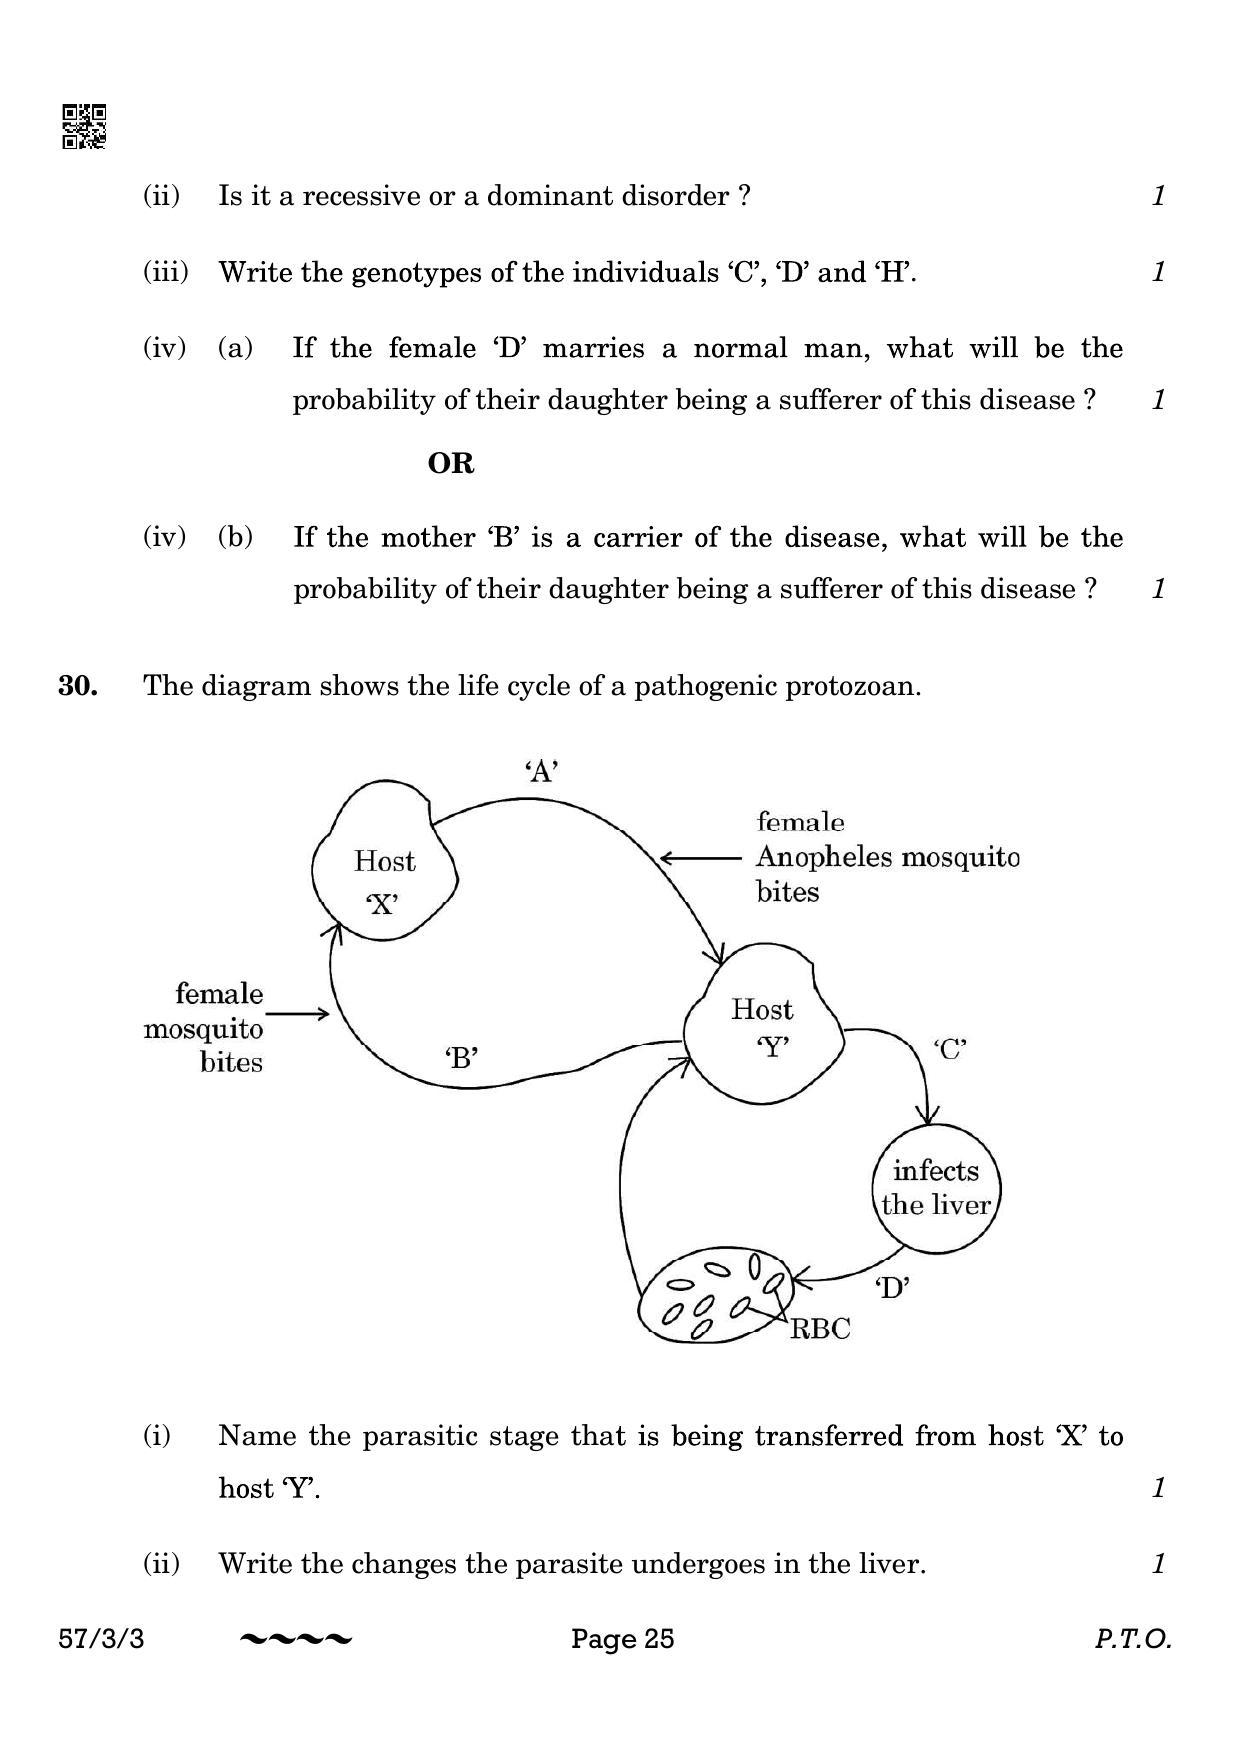 CBSE Class 12 57-3-3 Biology 2023 Question Paper - Page 25